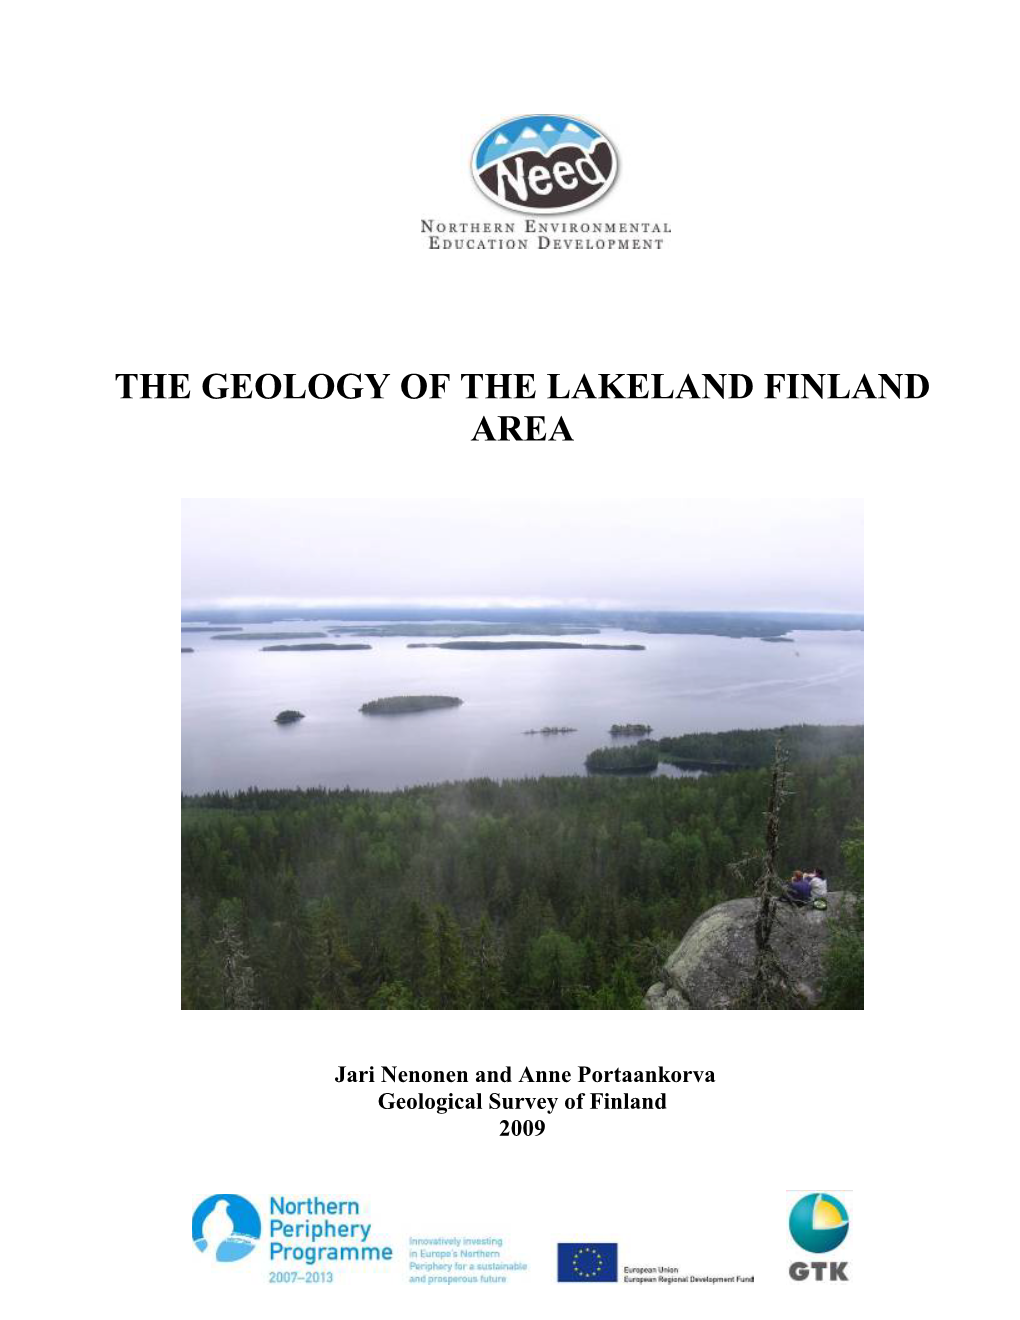 The Geology of the Lakeland Finland Area